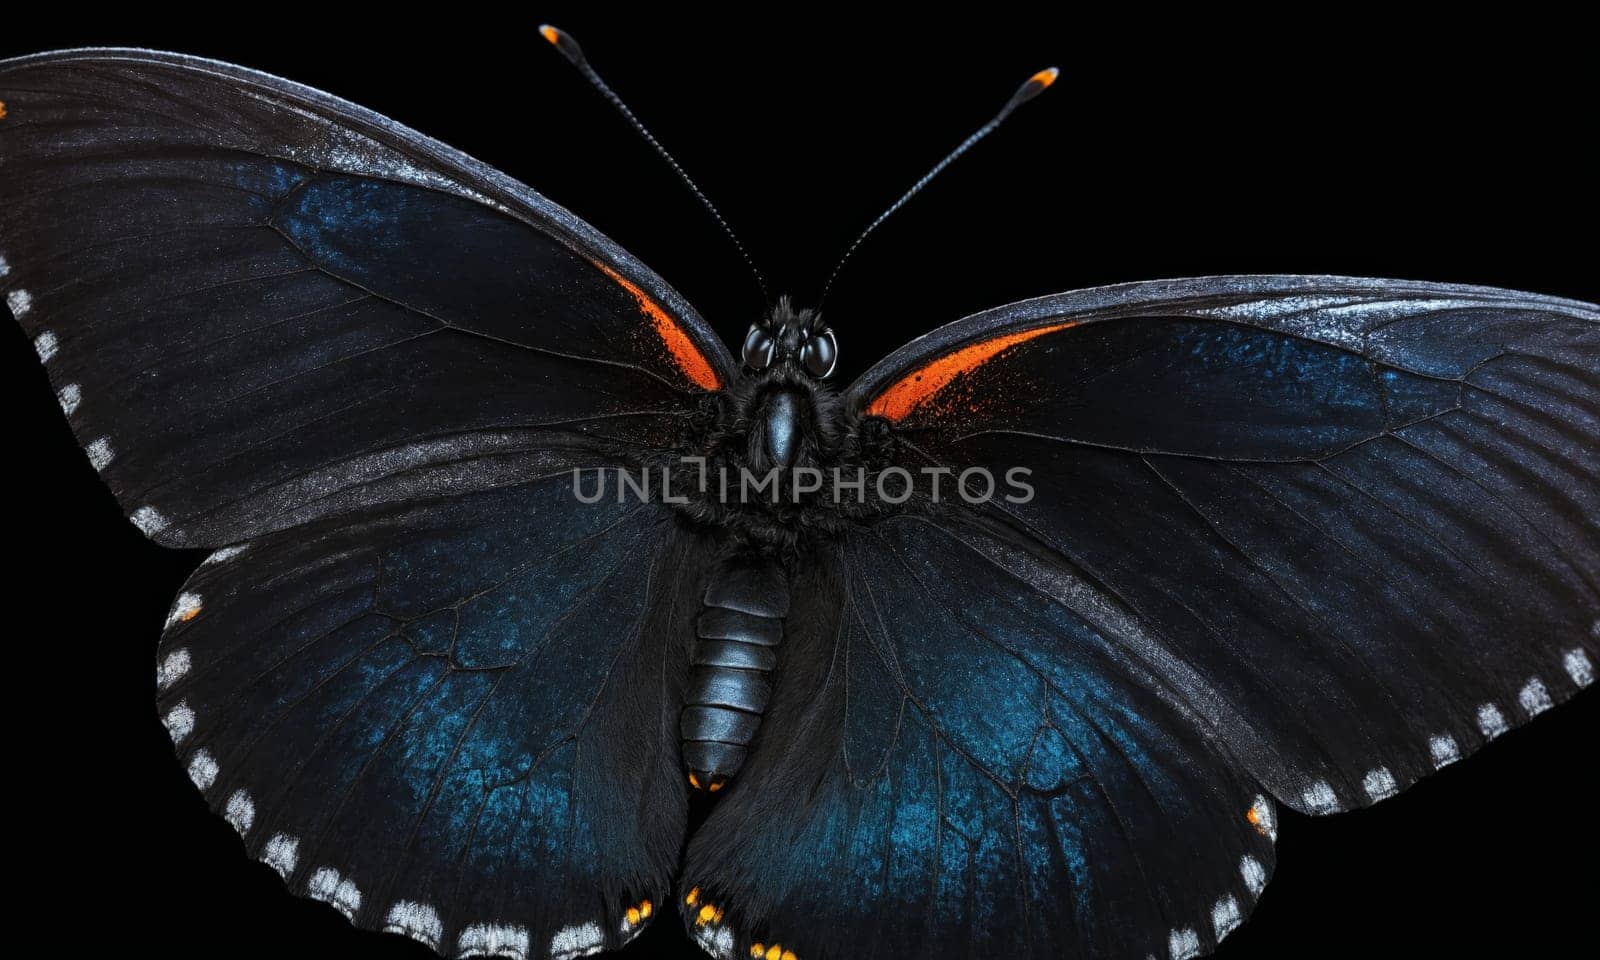 An electric blue and orange butterfly, a pollinator arthropod organism, is perched on a black background. The symmetry of its wings stands out in this macro photography shot